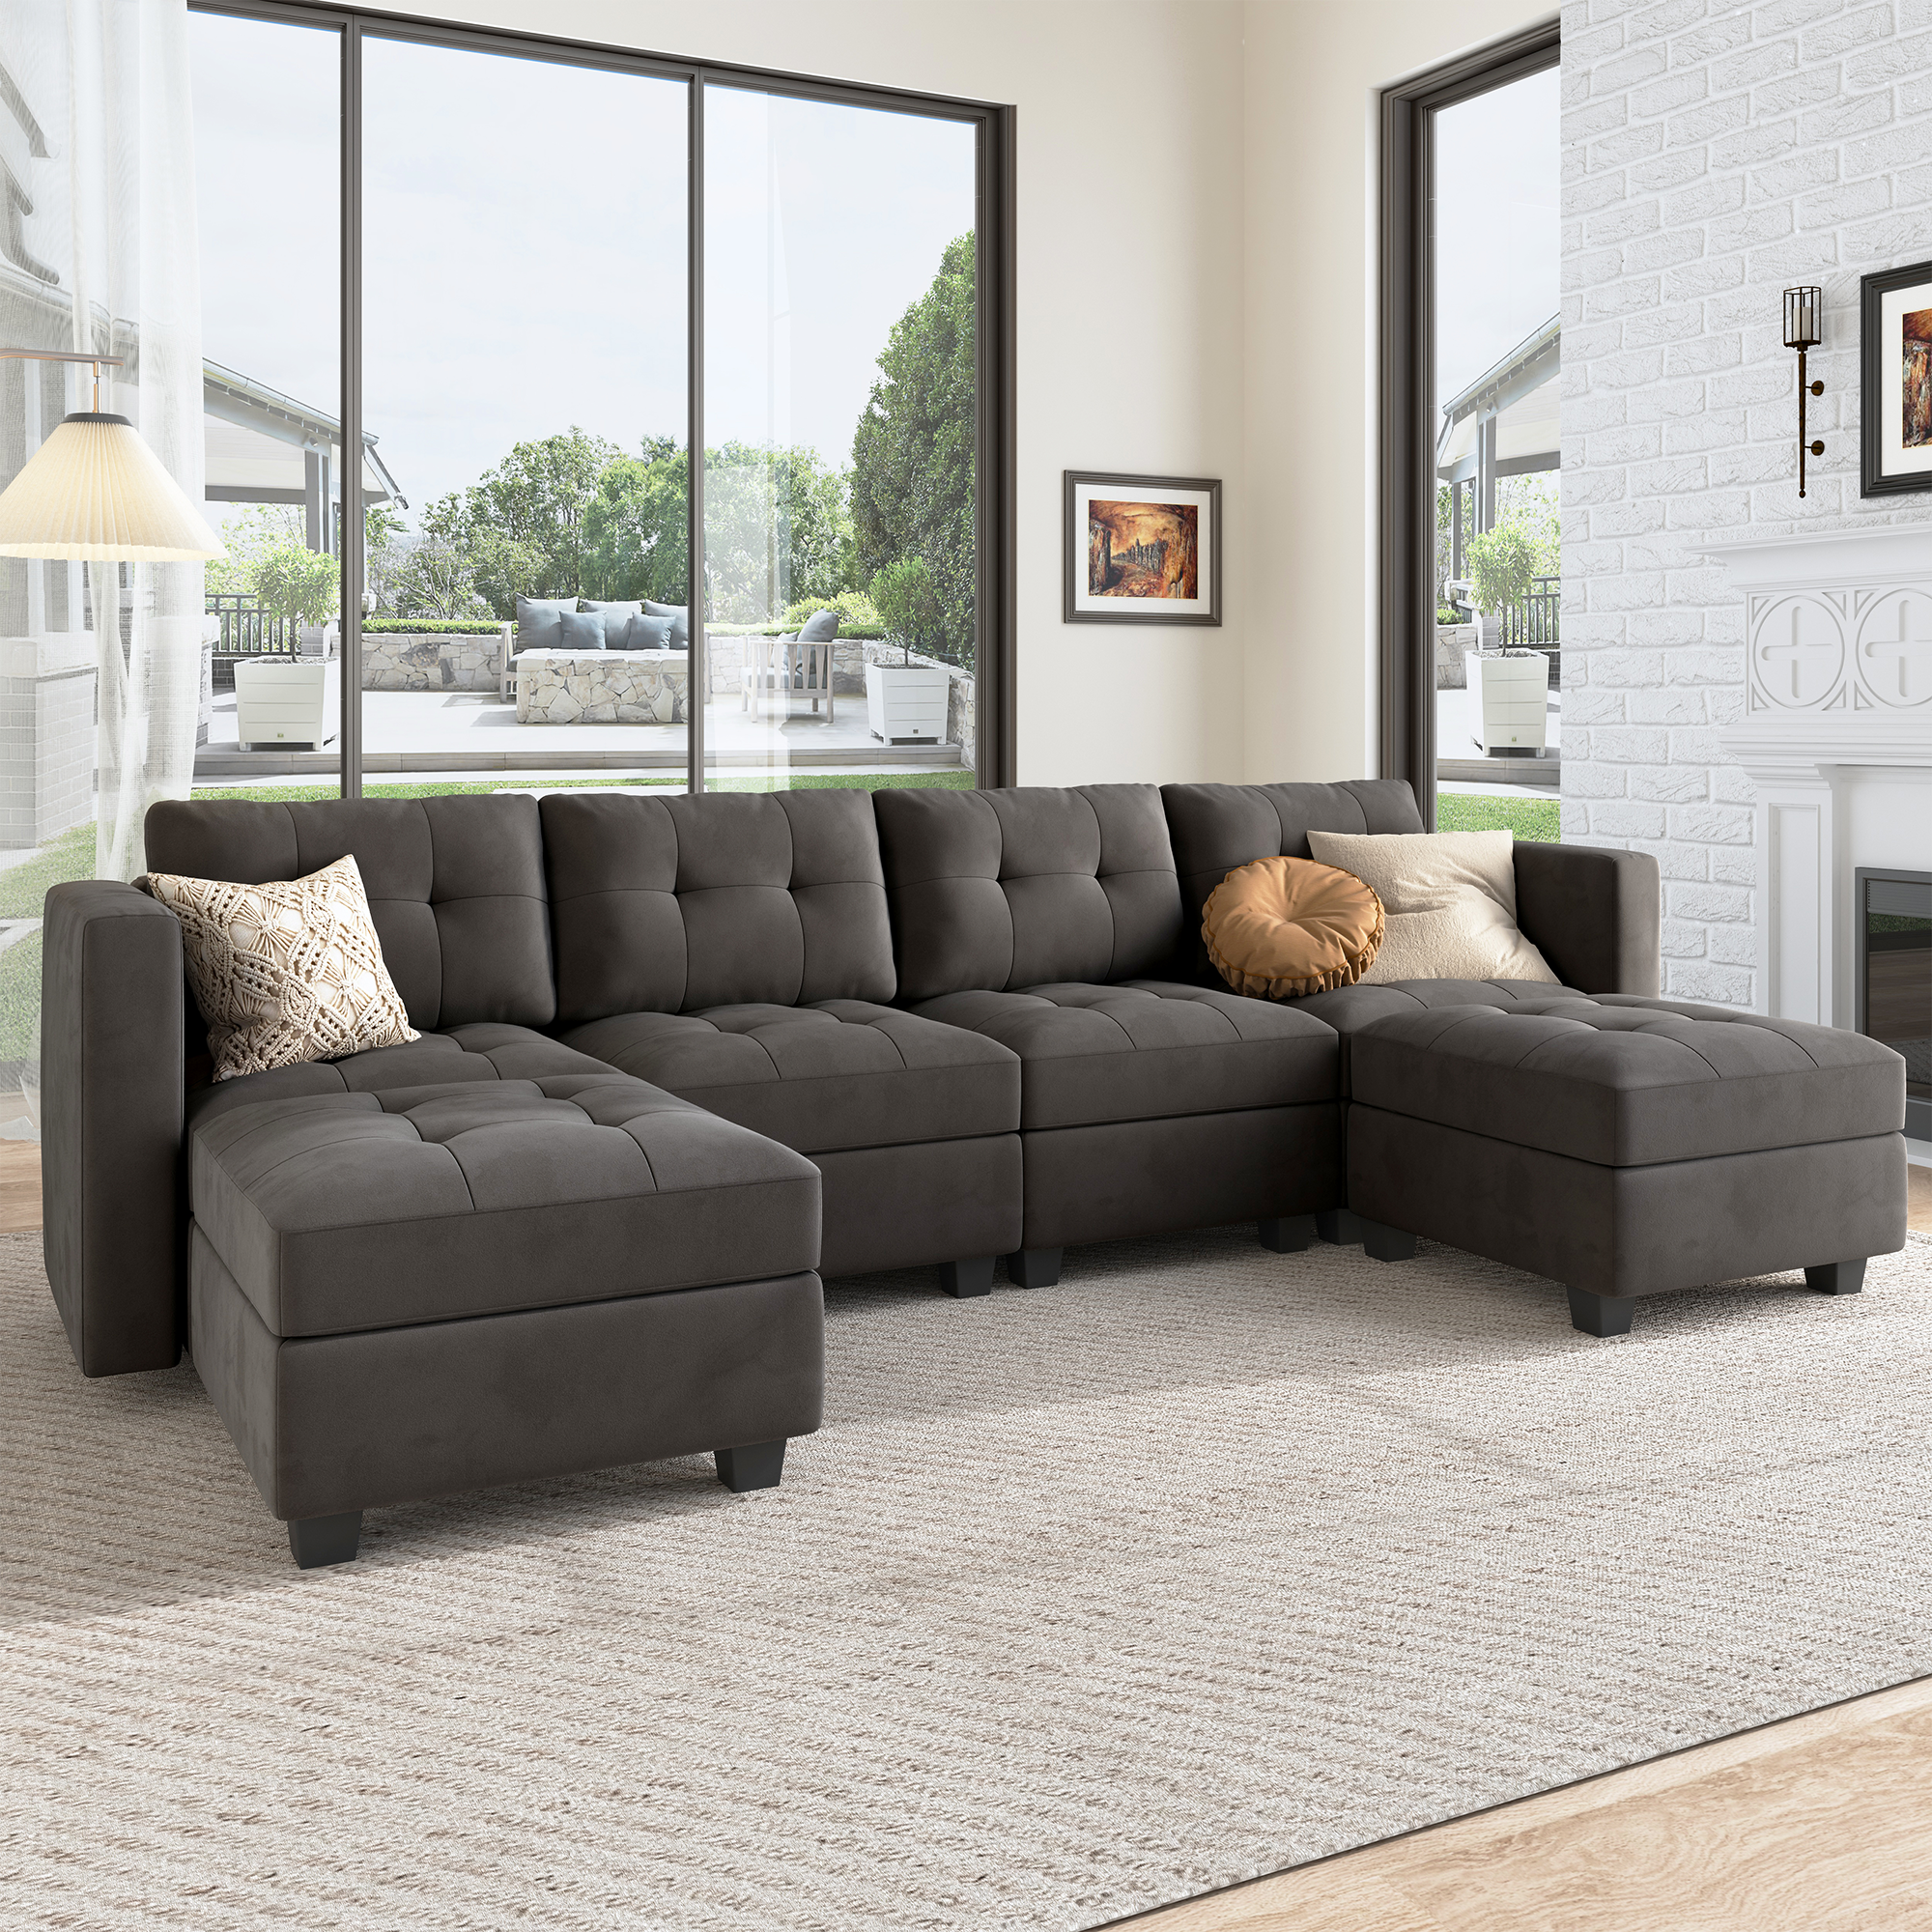 HONBAY Tufted Modular Sofa 4-Seat+1-Side Armrest+2-Ottoman with Storage Seater